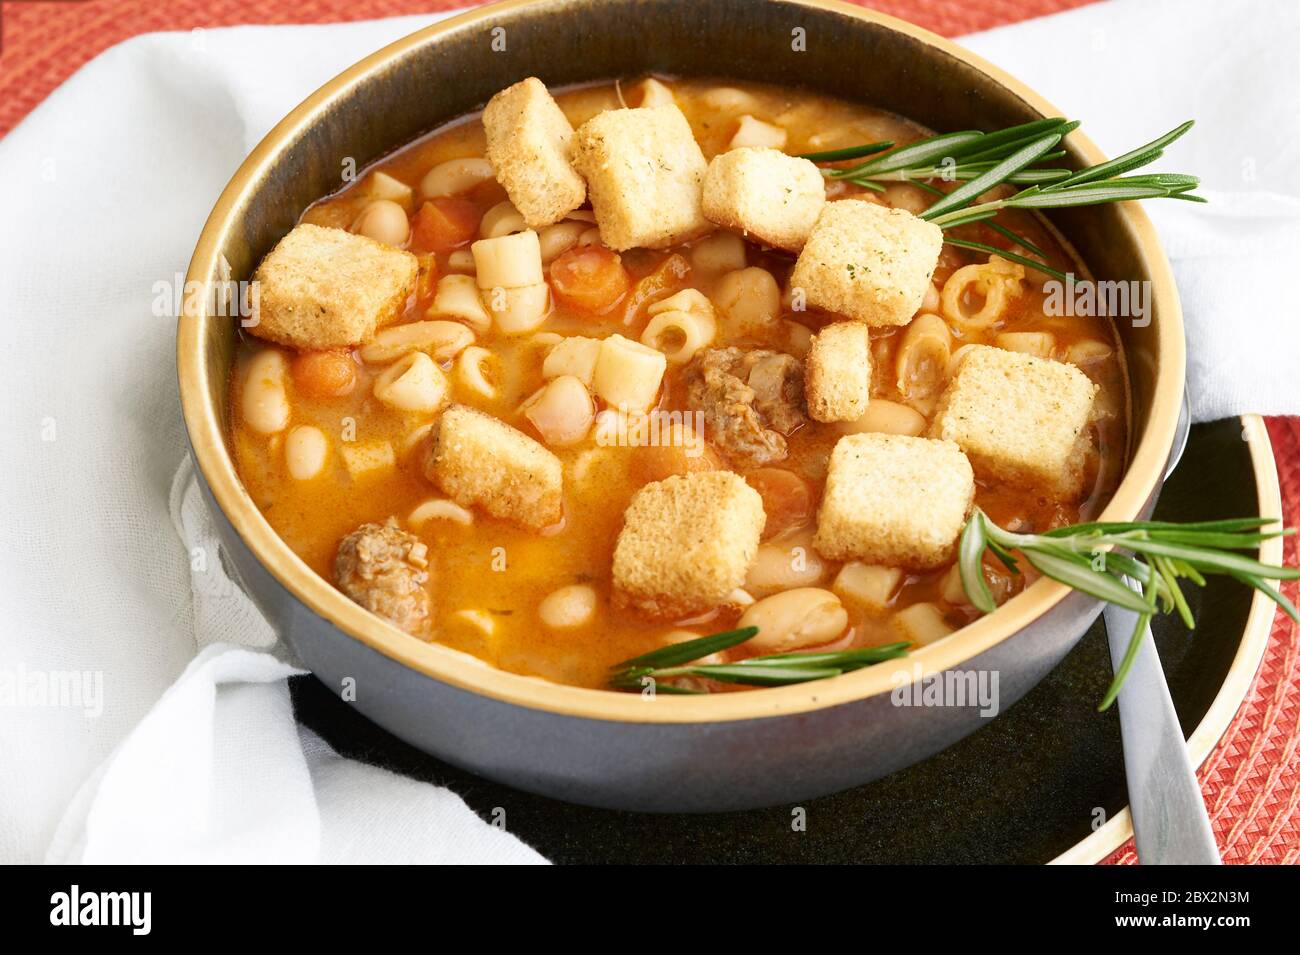 Pasta Fagioli authentic Italian soup made with beans, pasta and sausage. Stock Photo